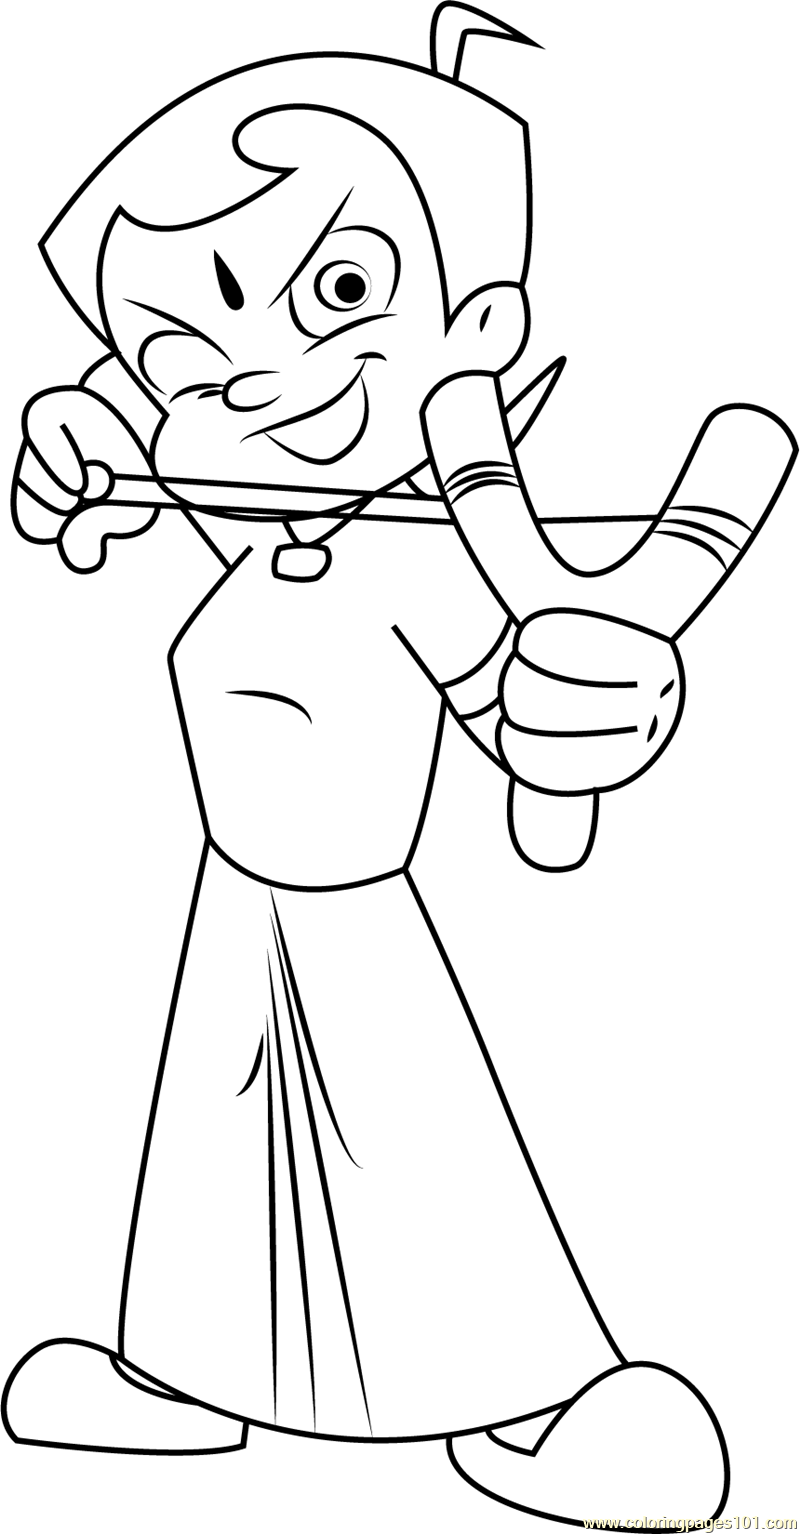 Chhota Bheem Coloring Page for Kids - Free Chhota Bheem Printable Coloring  Pages Online for Kids  | Coloring Pages for Kids